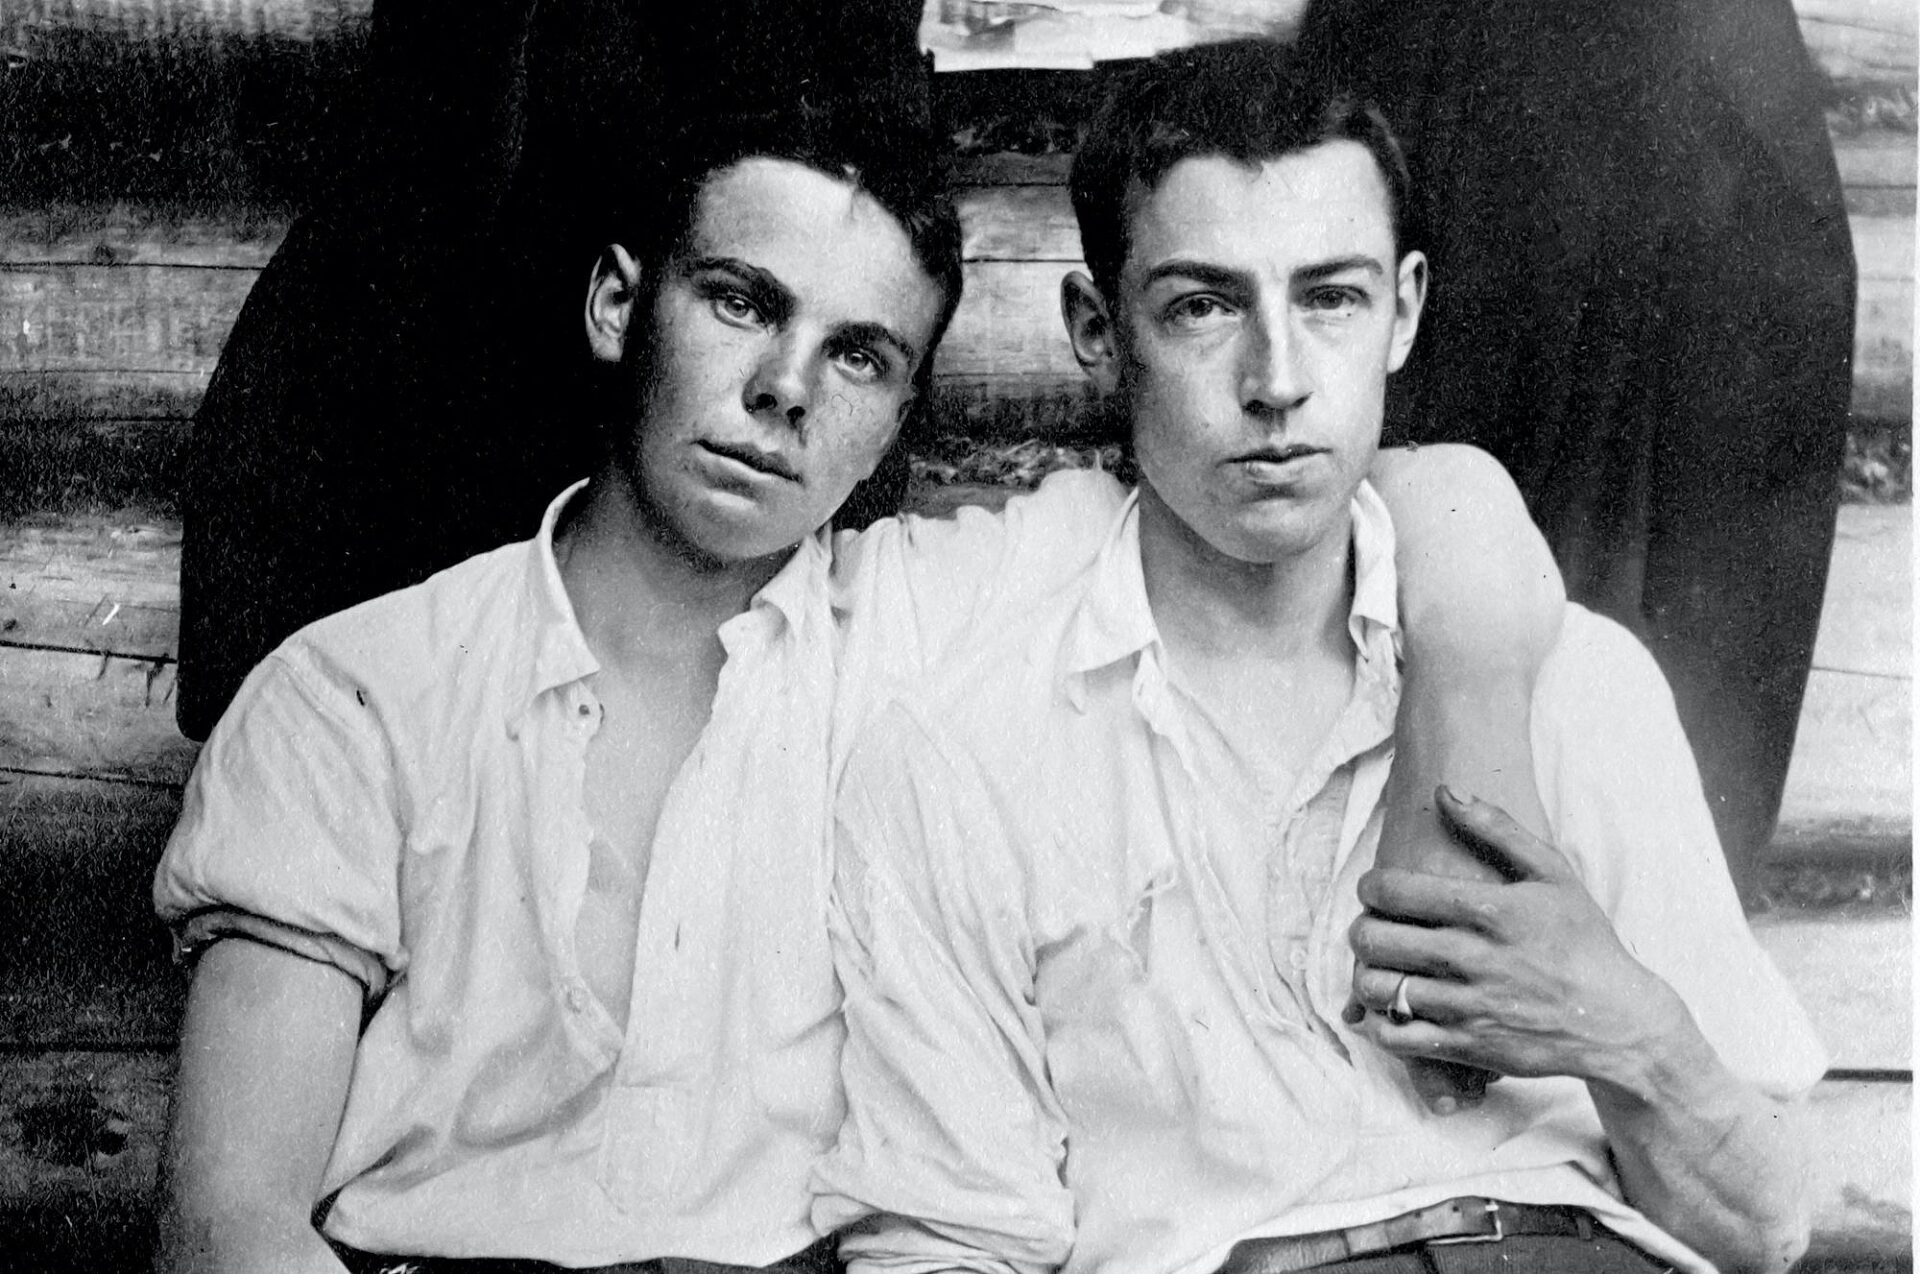 A black and white image of two men sitting in a cabin. The man on the left has his left arm around the shoulders of the man on the right. The man on the right is holding the other man's hand as it rests over his shoulder. He is wearing a ring on his left ring finger.